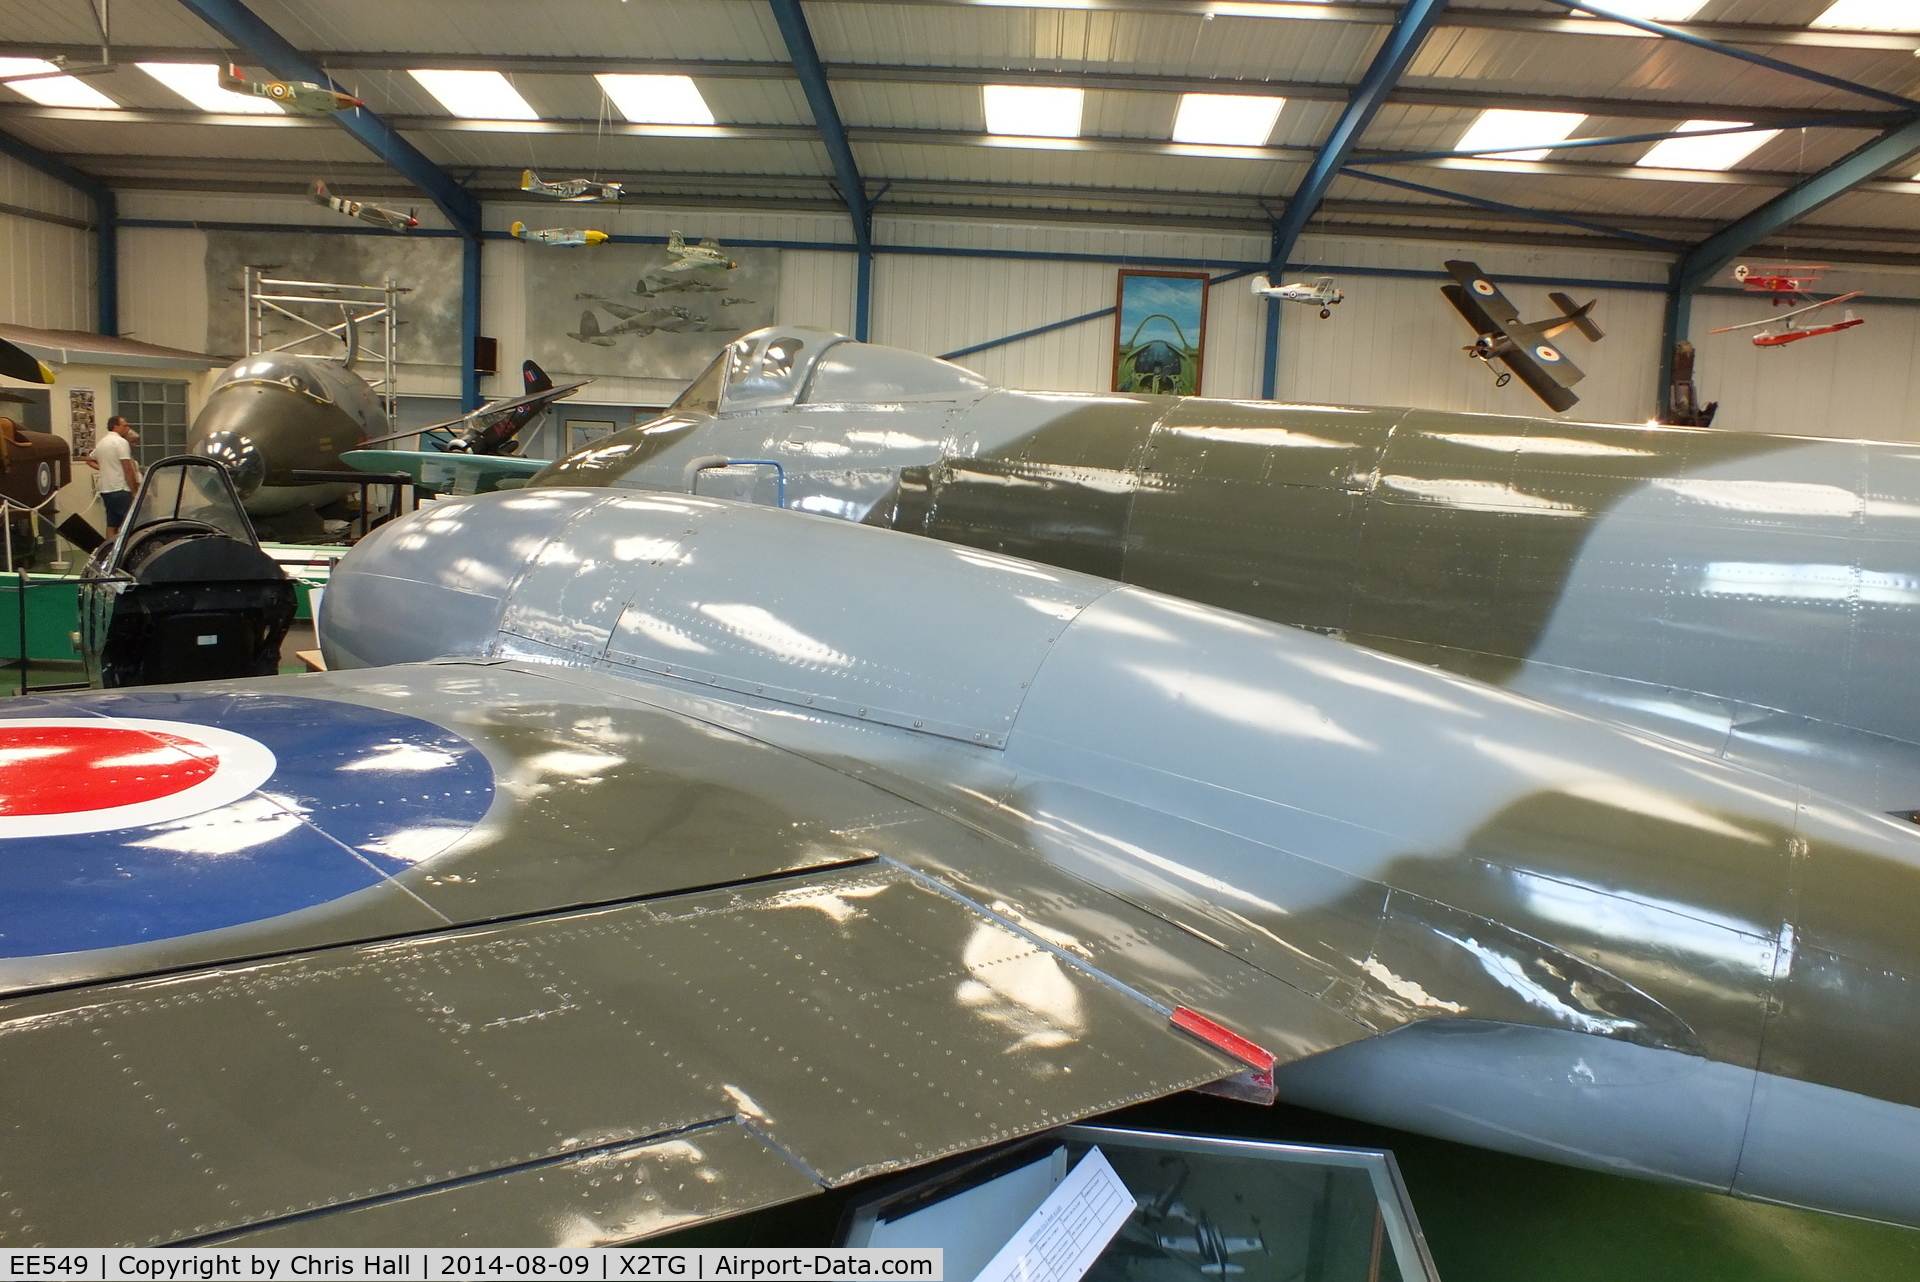 EE549, 1946 Gloster Meteor F.4 C/N Not found EE549, at the Tangmere Military Aviation Museum